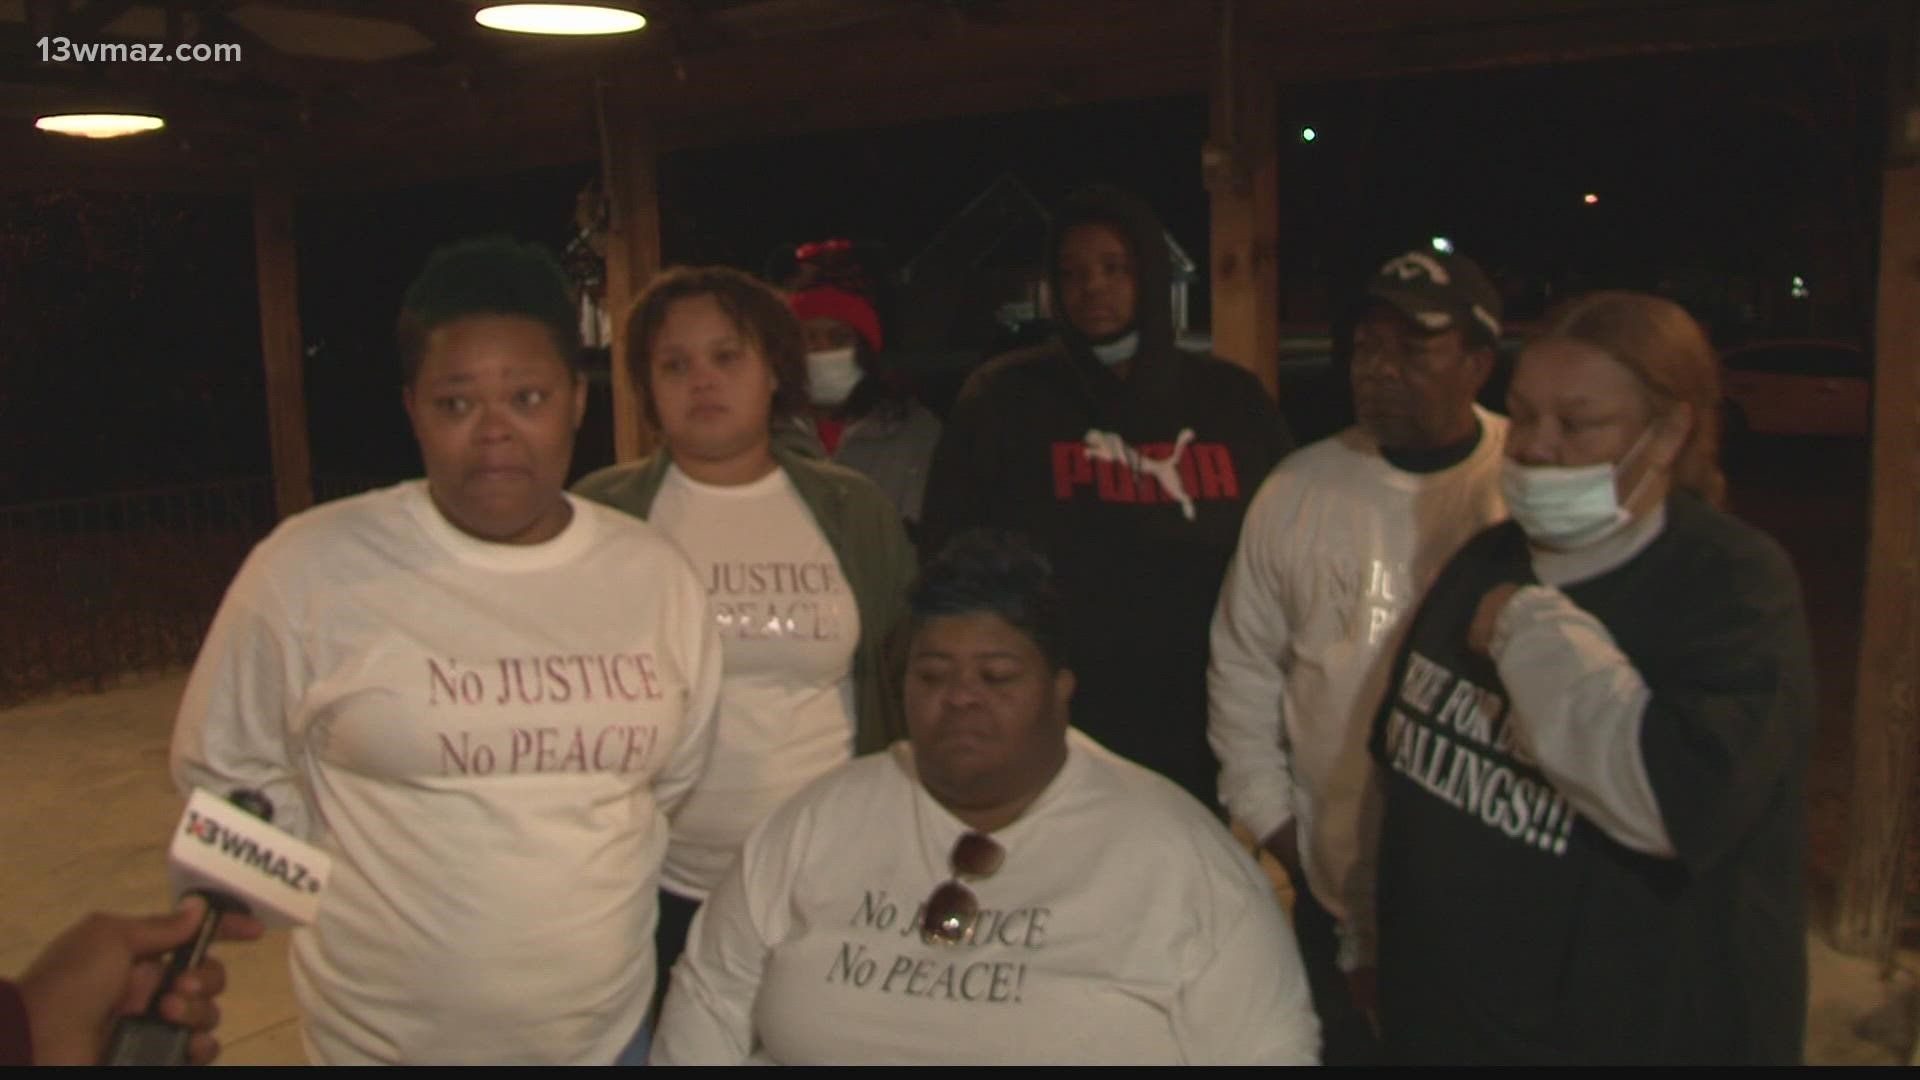 About 50 people gathered Friday night to remember Denrick Stallings, who was shot and killed by a Crawford deputy during a traffic stop